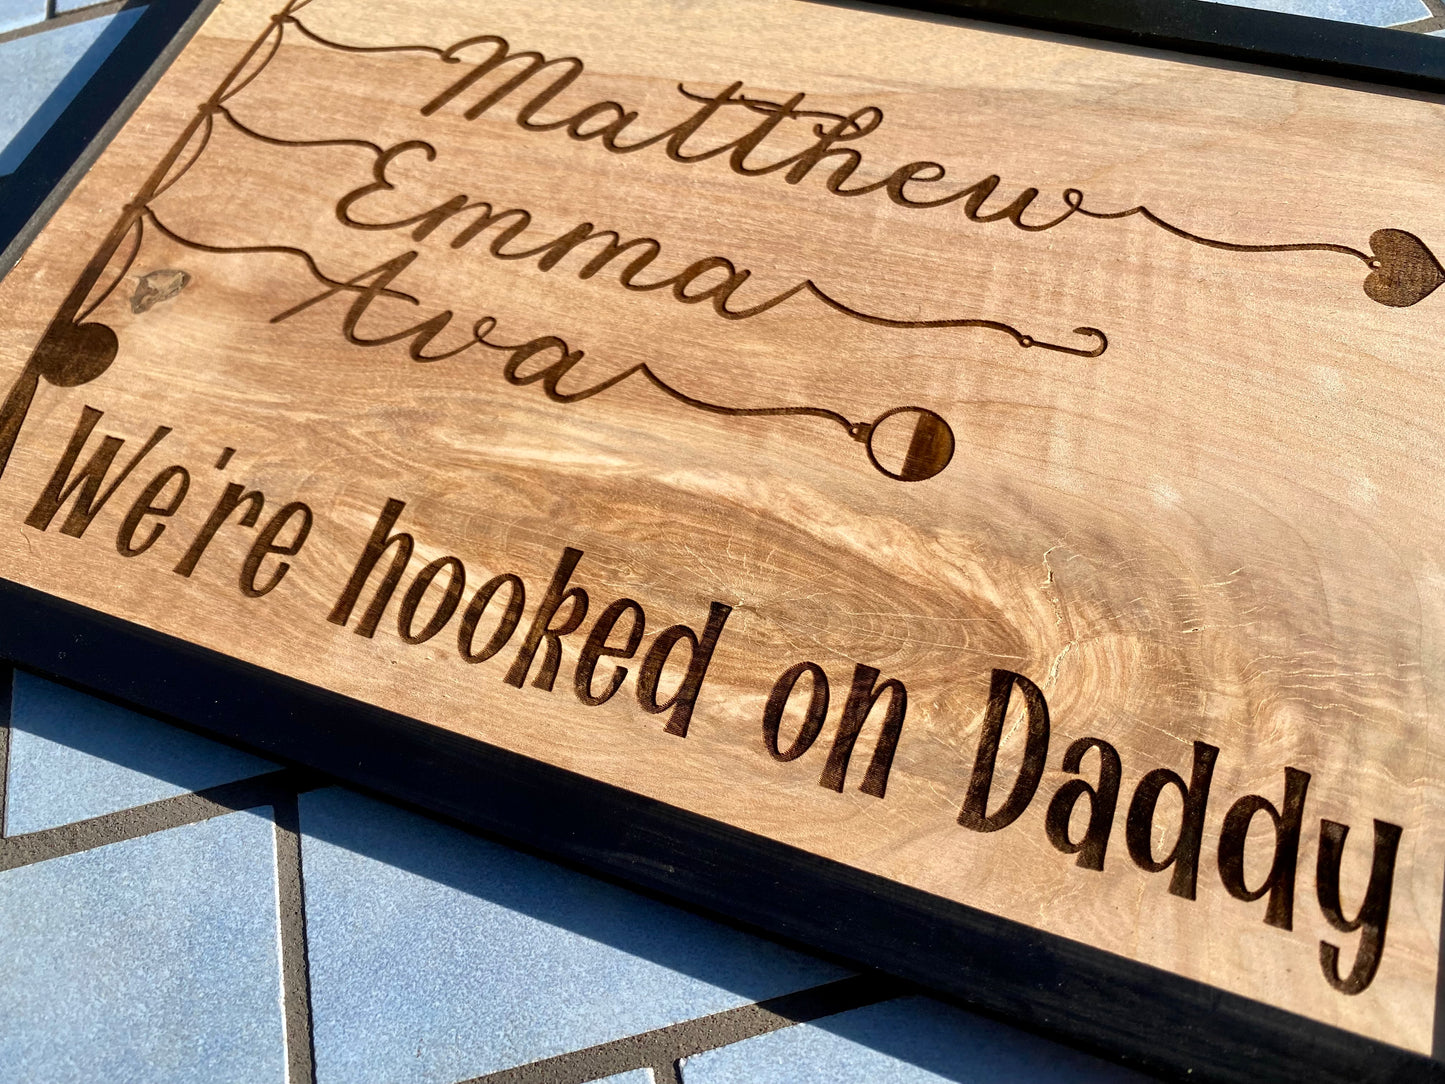 We’re Hooked on Daddy - Father’s Day Gift - Birthday Gift - Dad Gift - Engraved Wood Sign - Custom Decor